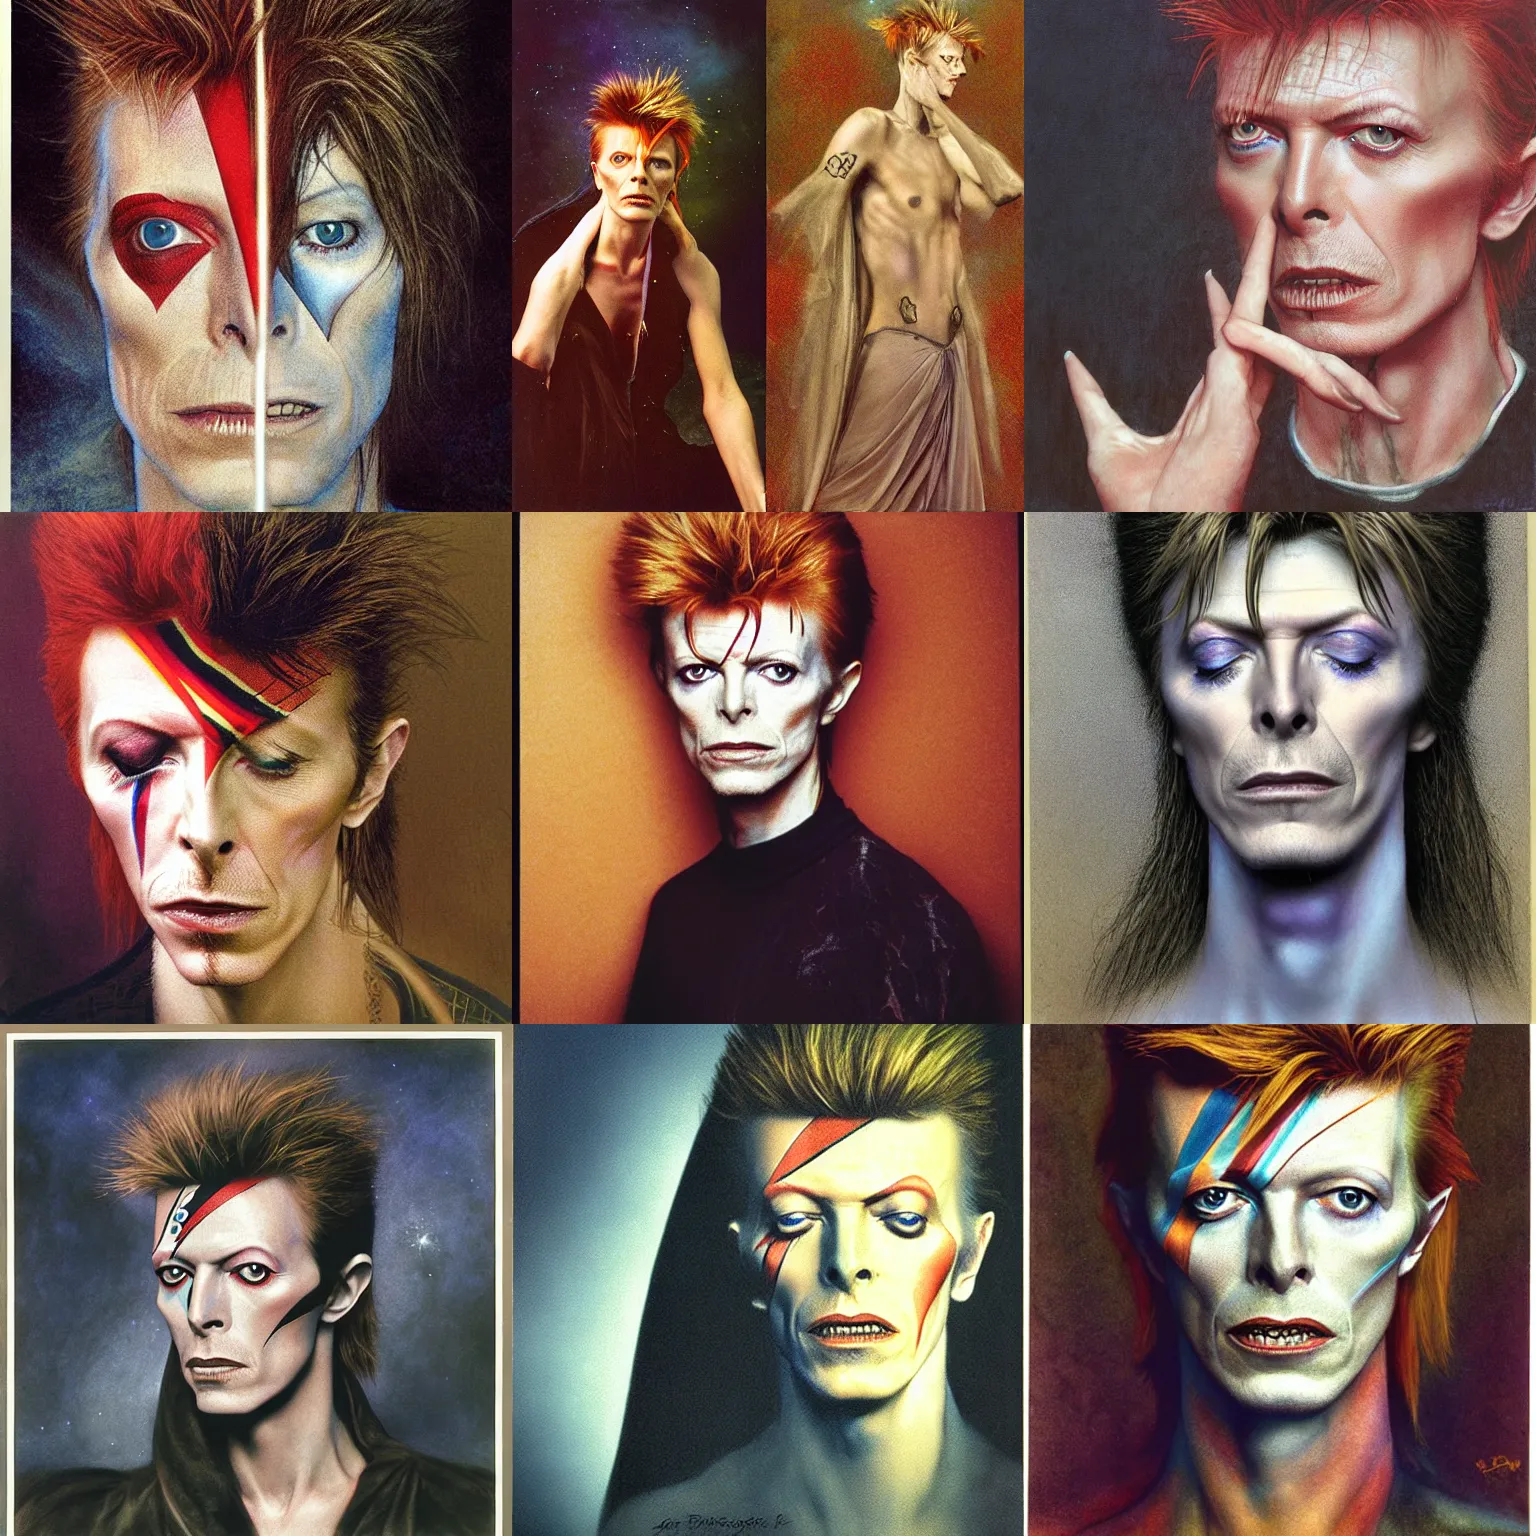 Prompt: David Bowie by Brian Froud